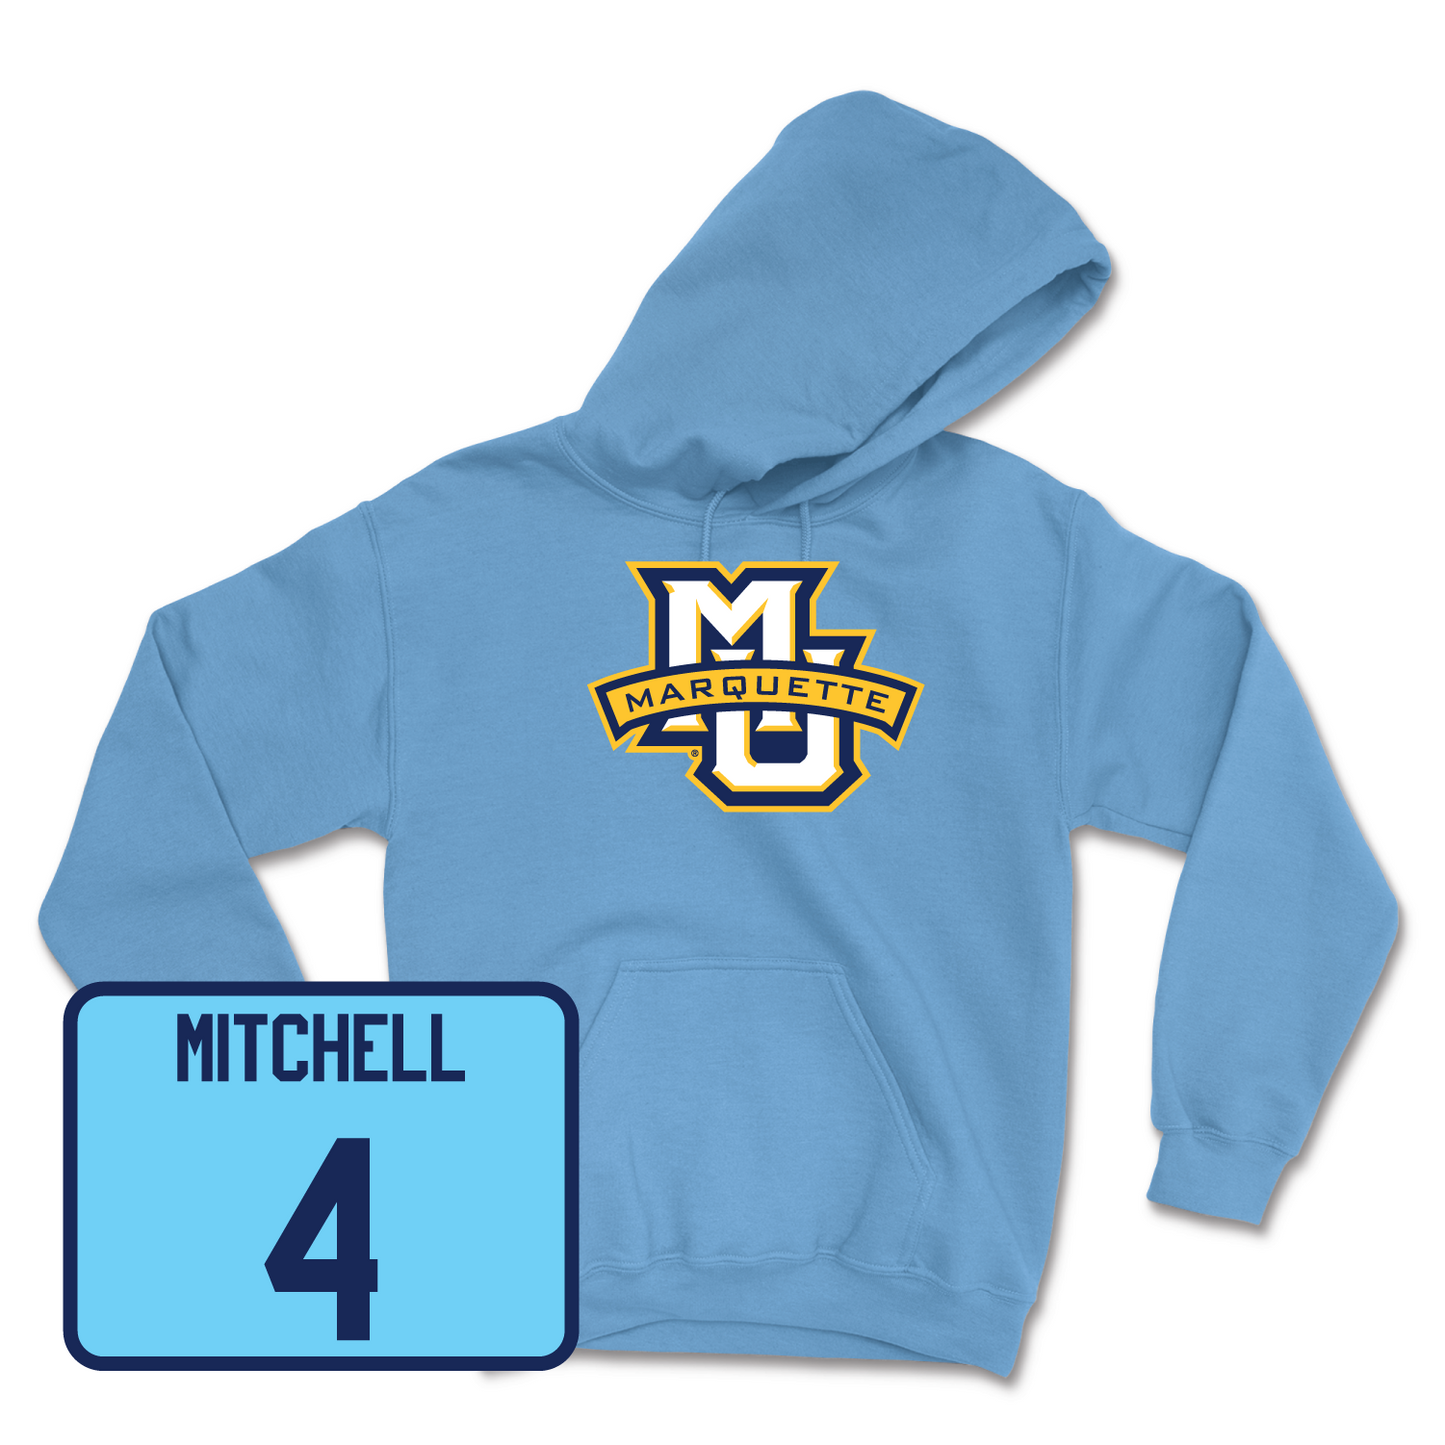 Championship Blue Men's Basketball Marquette Hoodie 2 X-Large / Stevie Mitchell | #4